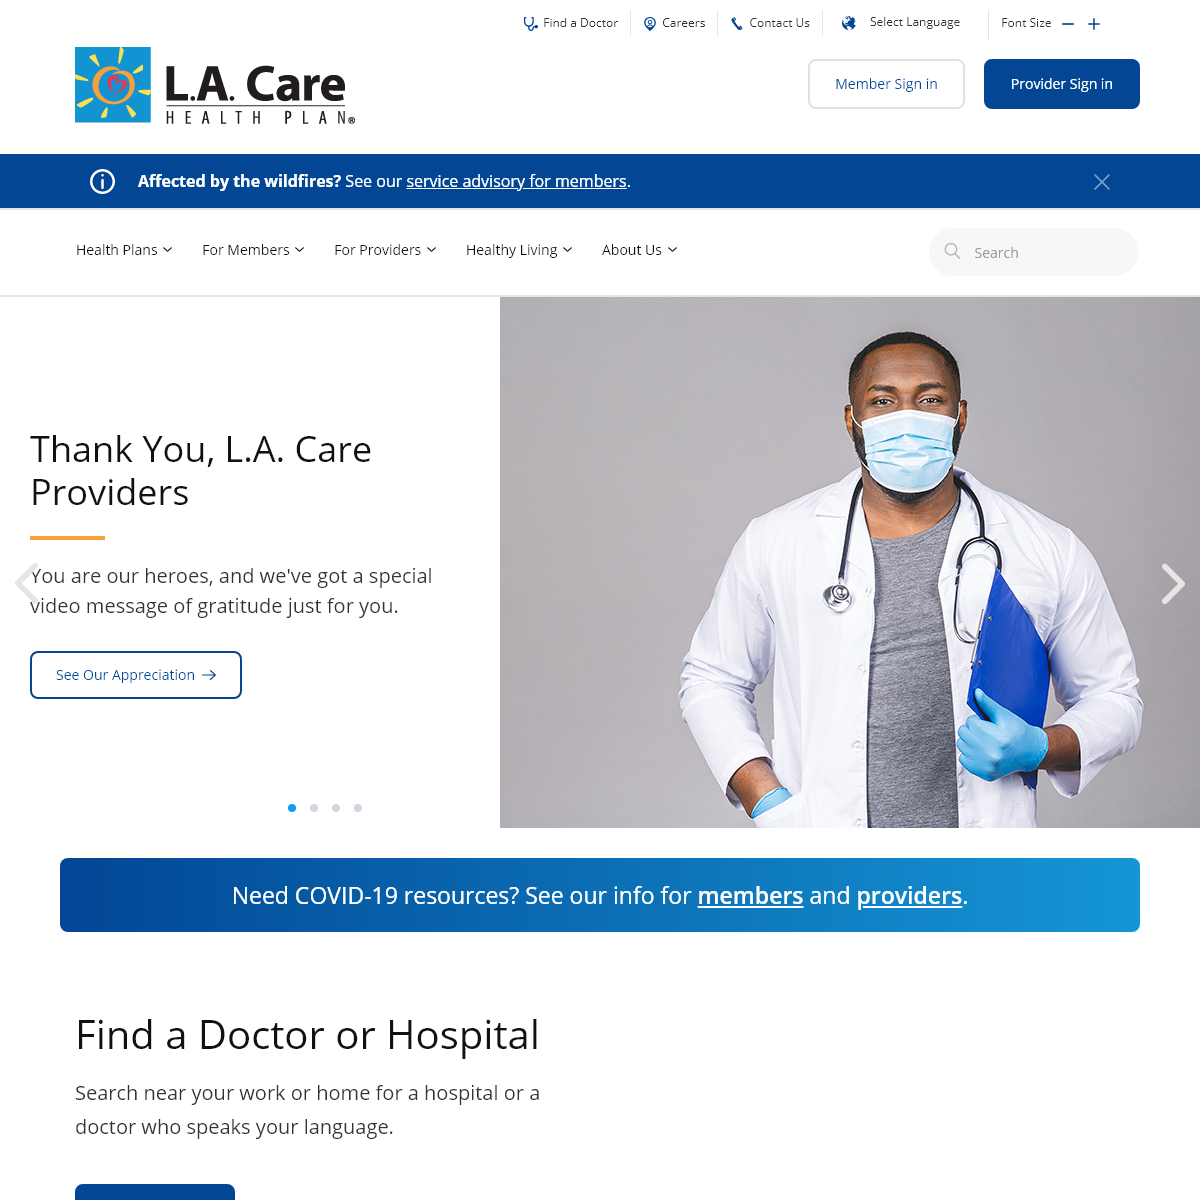 A complete backup of lacare.org